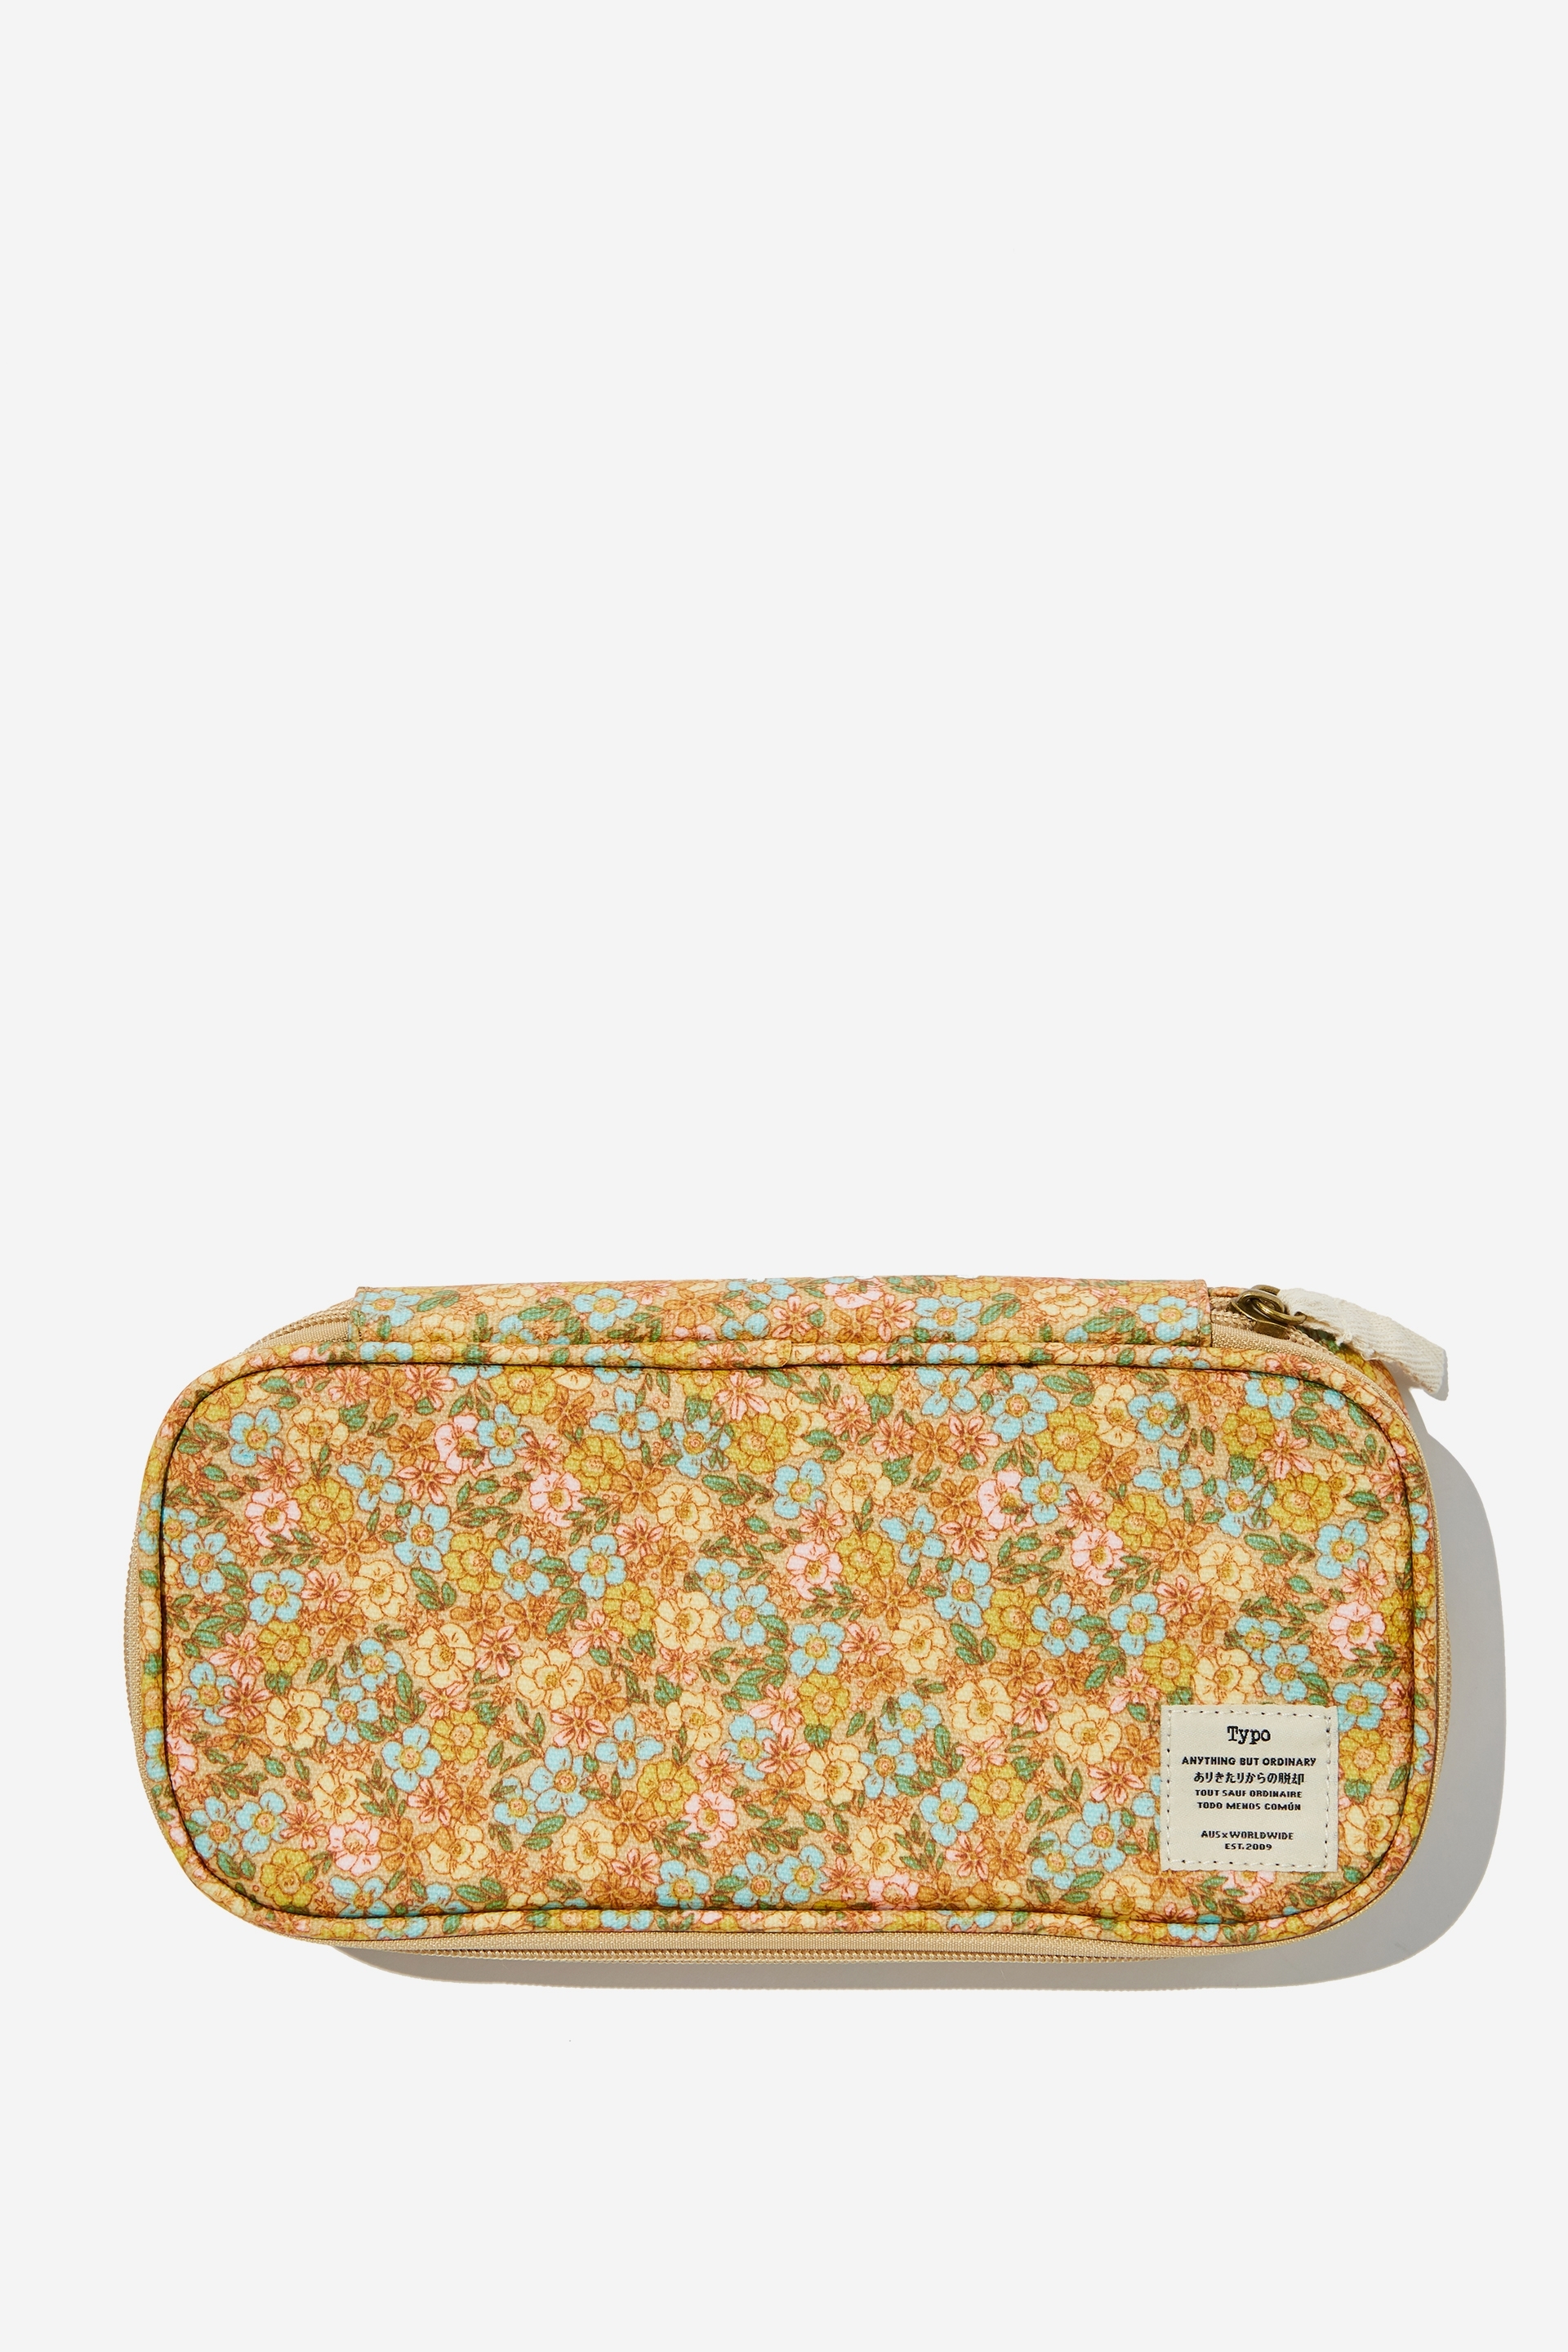 Typo - Switch It Up Gaming Case - Ditsy floral sand